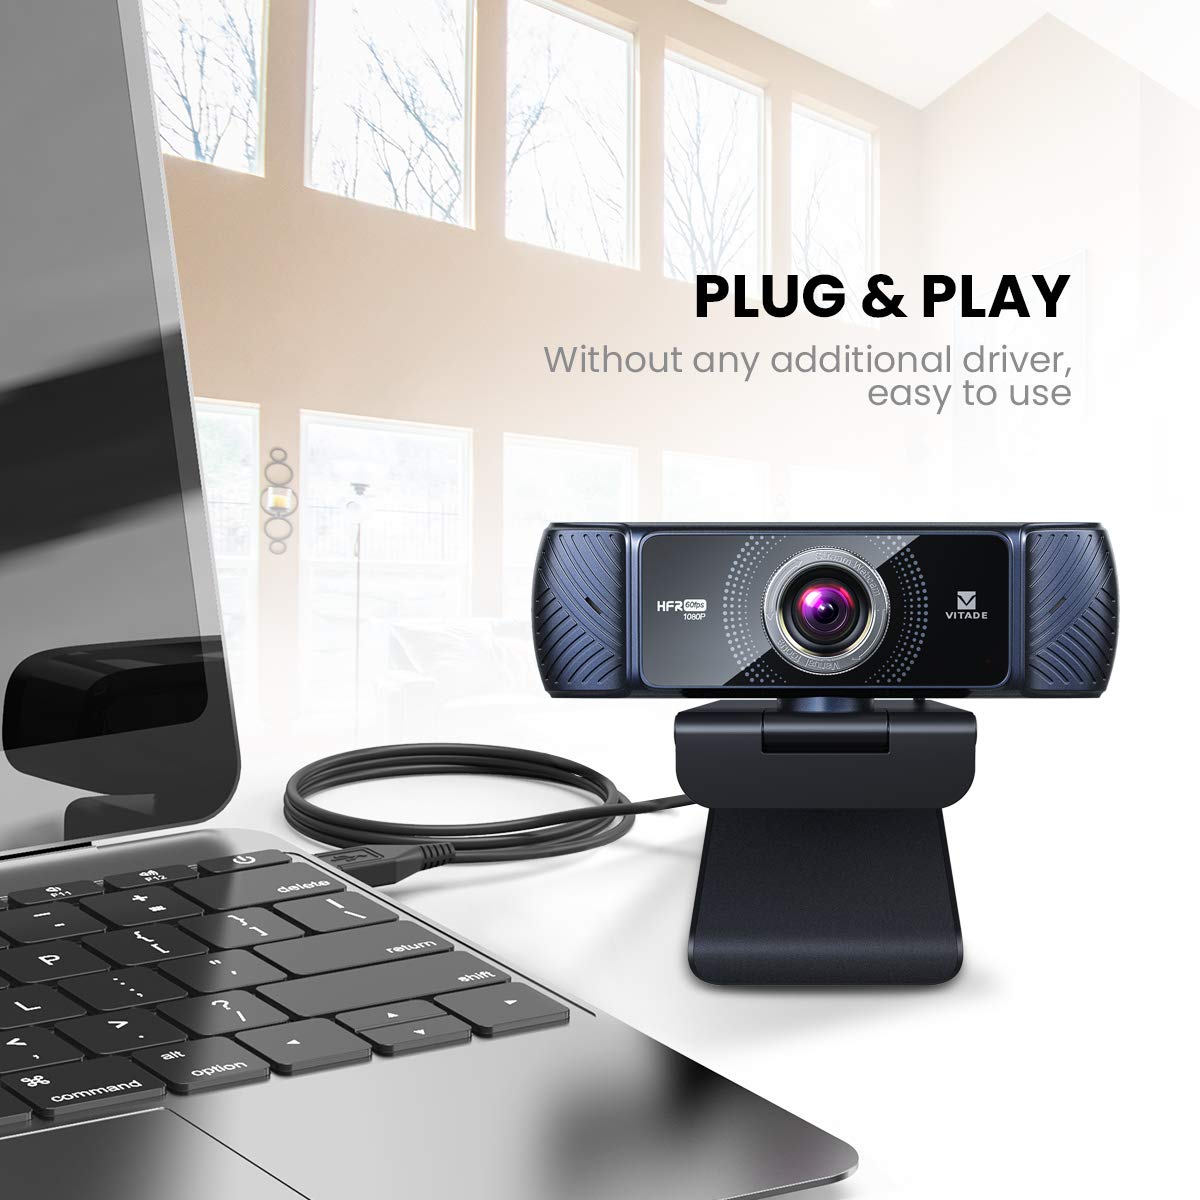 VITADE Webcam 1080P 60fps with Microphone for Streaming, 682H Pro HD USB Computer Web Camera Video Cam for Gaming Conferencing Mac Windows Desktop PC Laptop Xbox Skype OBS Twitch YouTube Xsplit